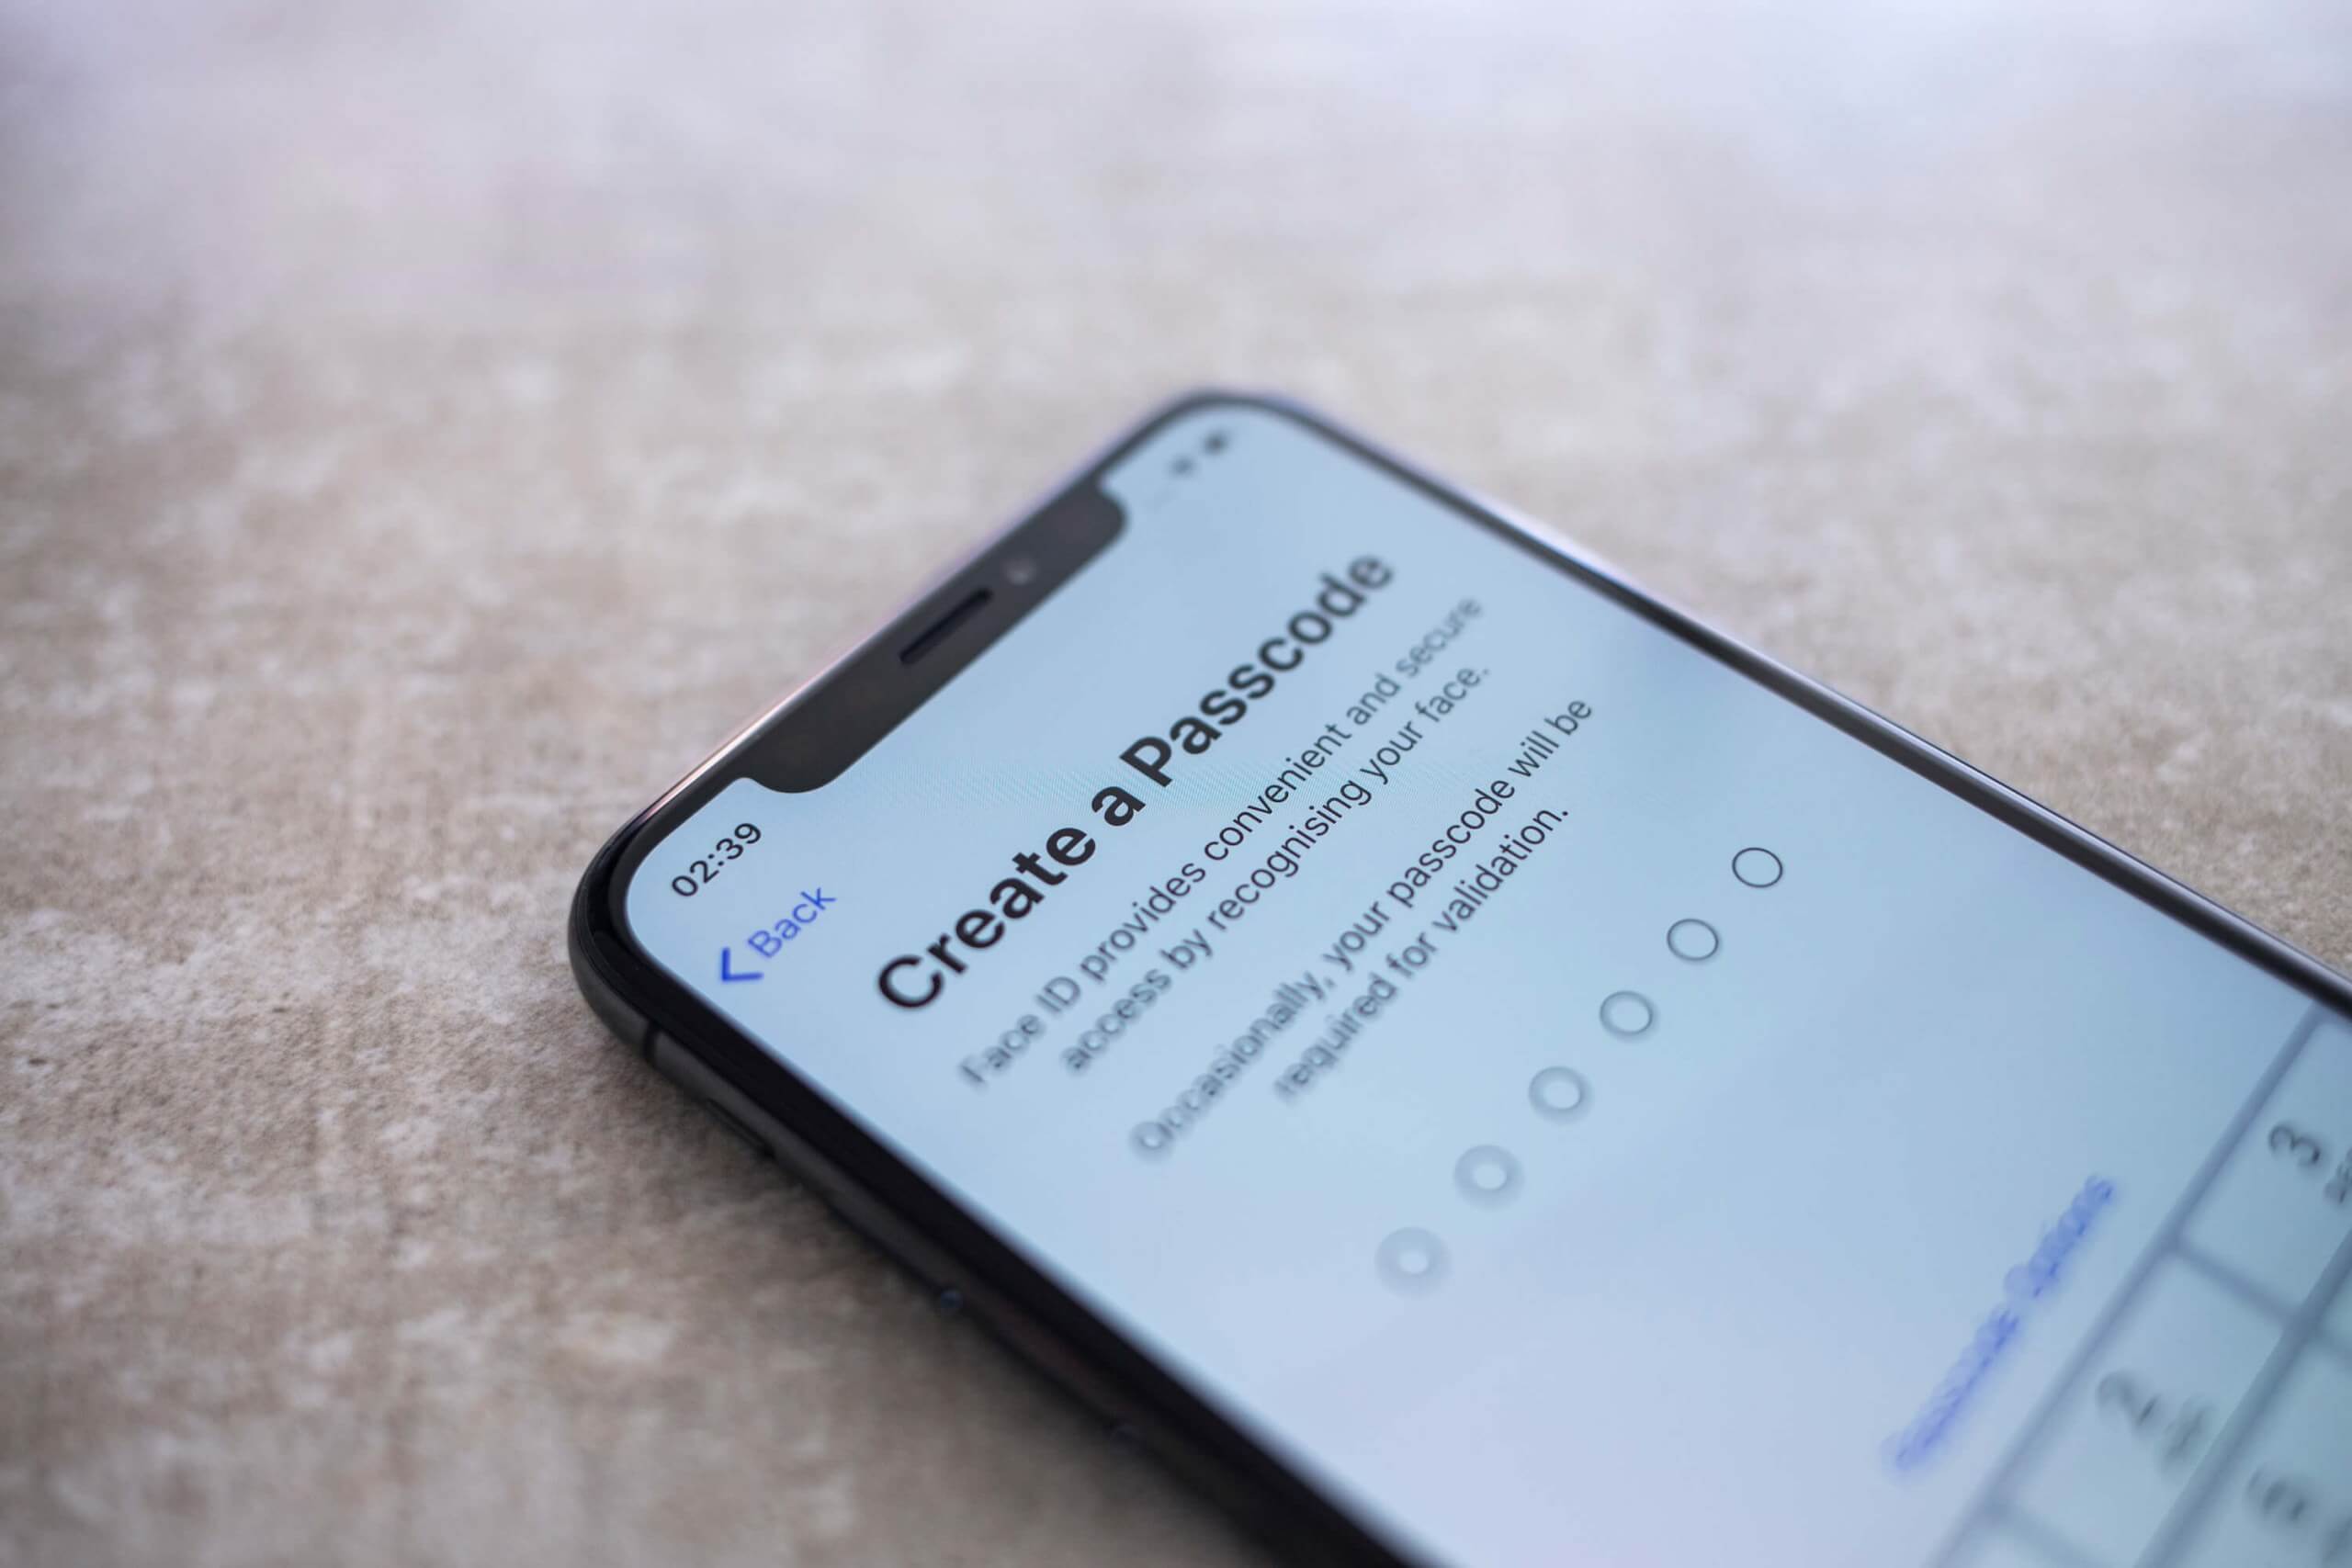 Recent search warrant reportedly shows FBI can access data on locked iPhone 11